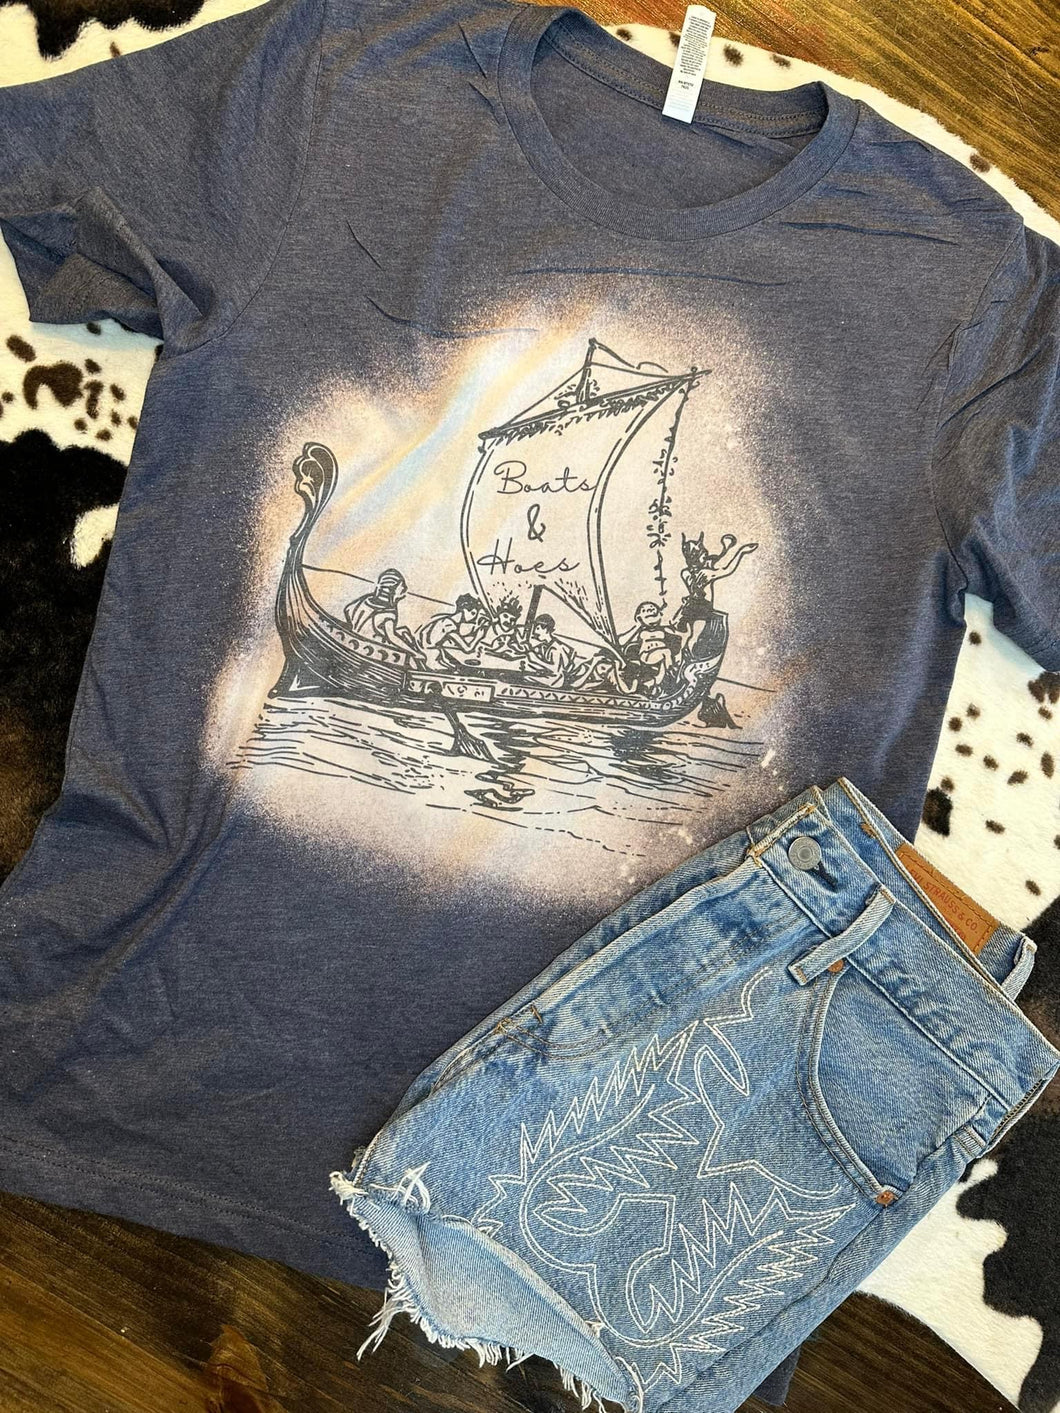 Boats & hoes bleached graphic tee - Mavictoria Designs Hot Press Express